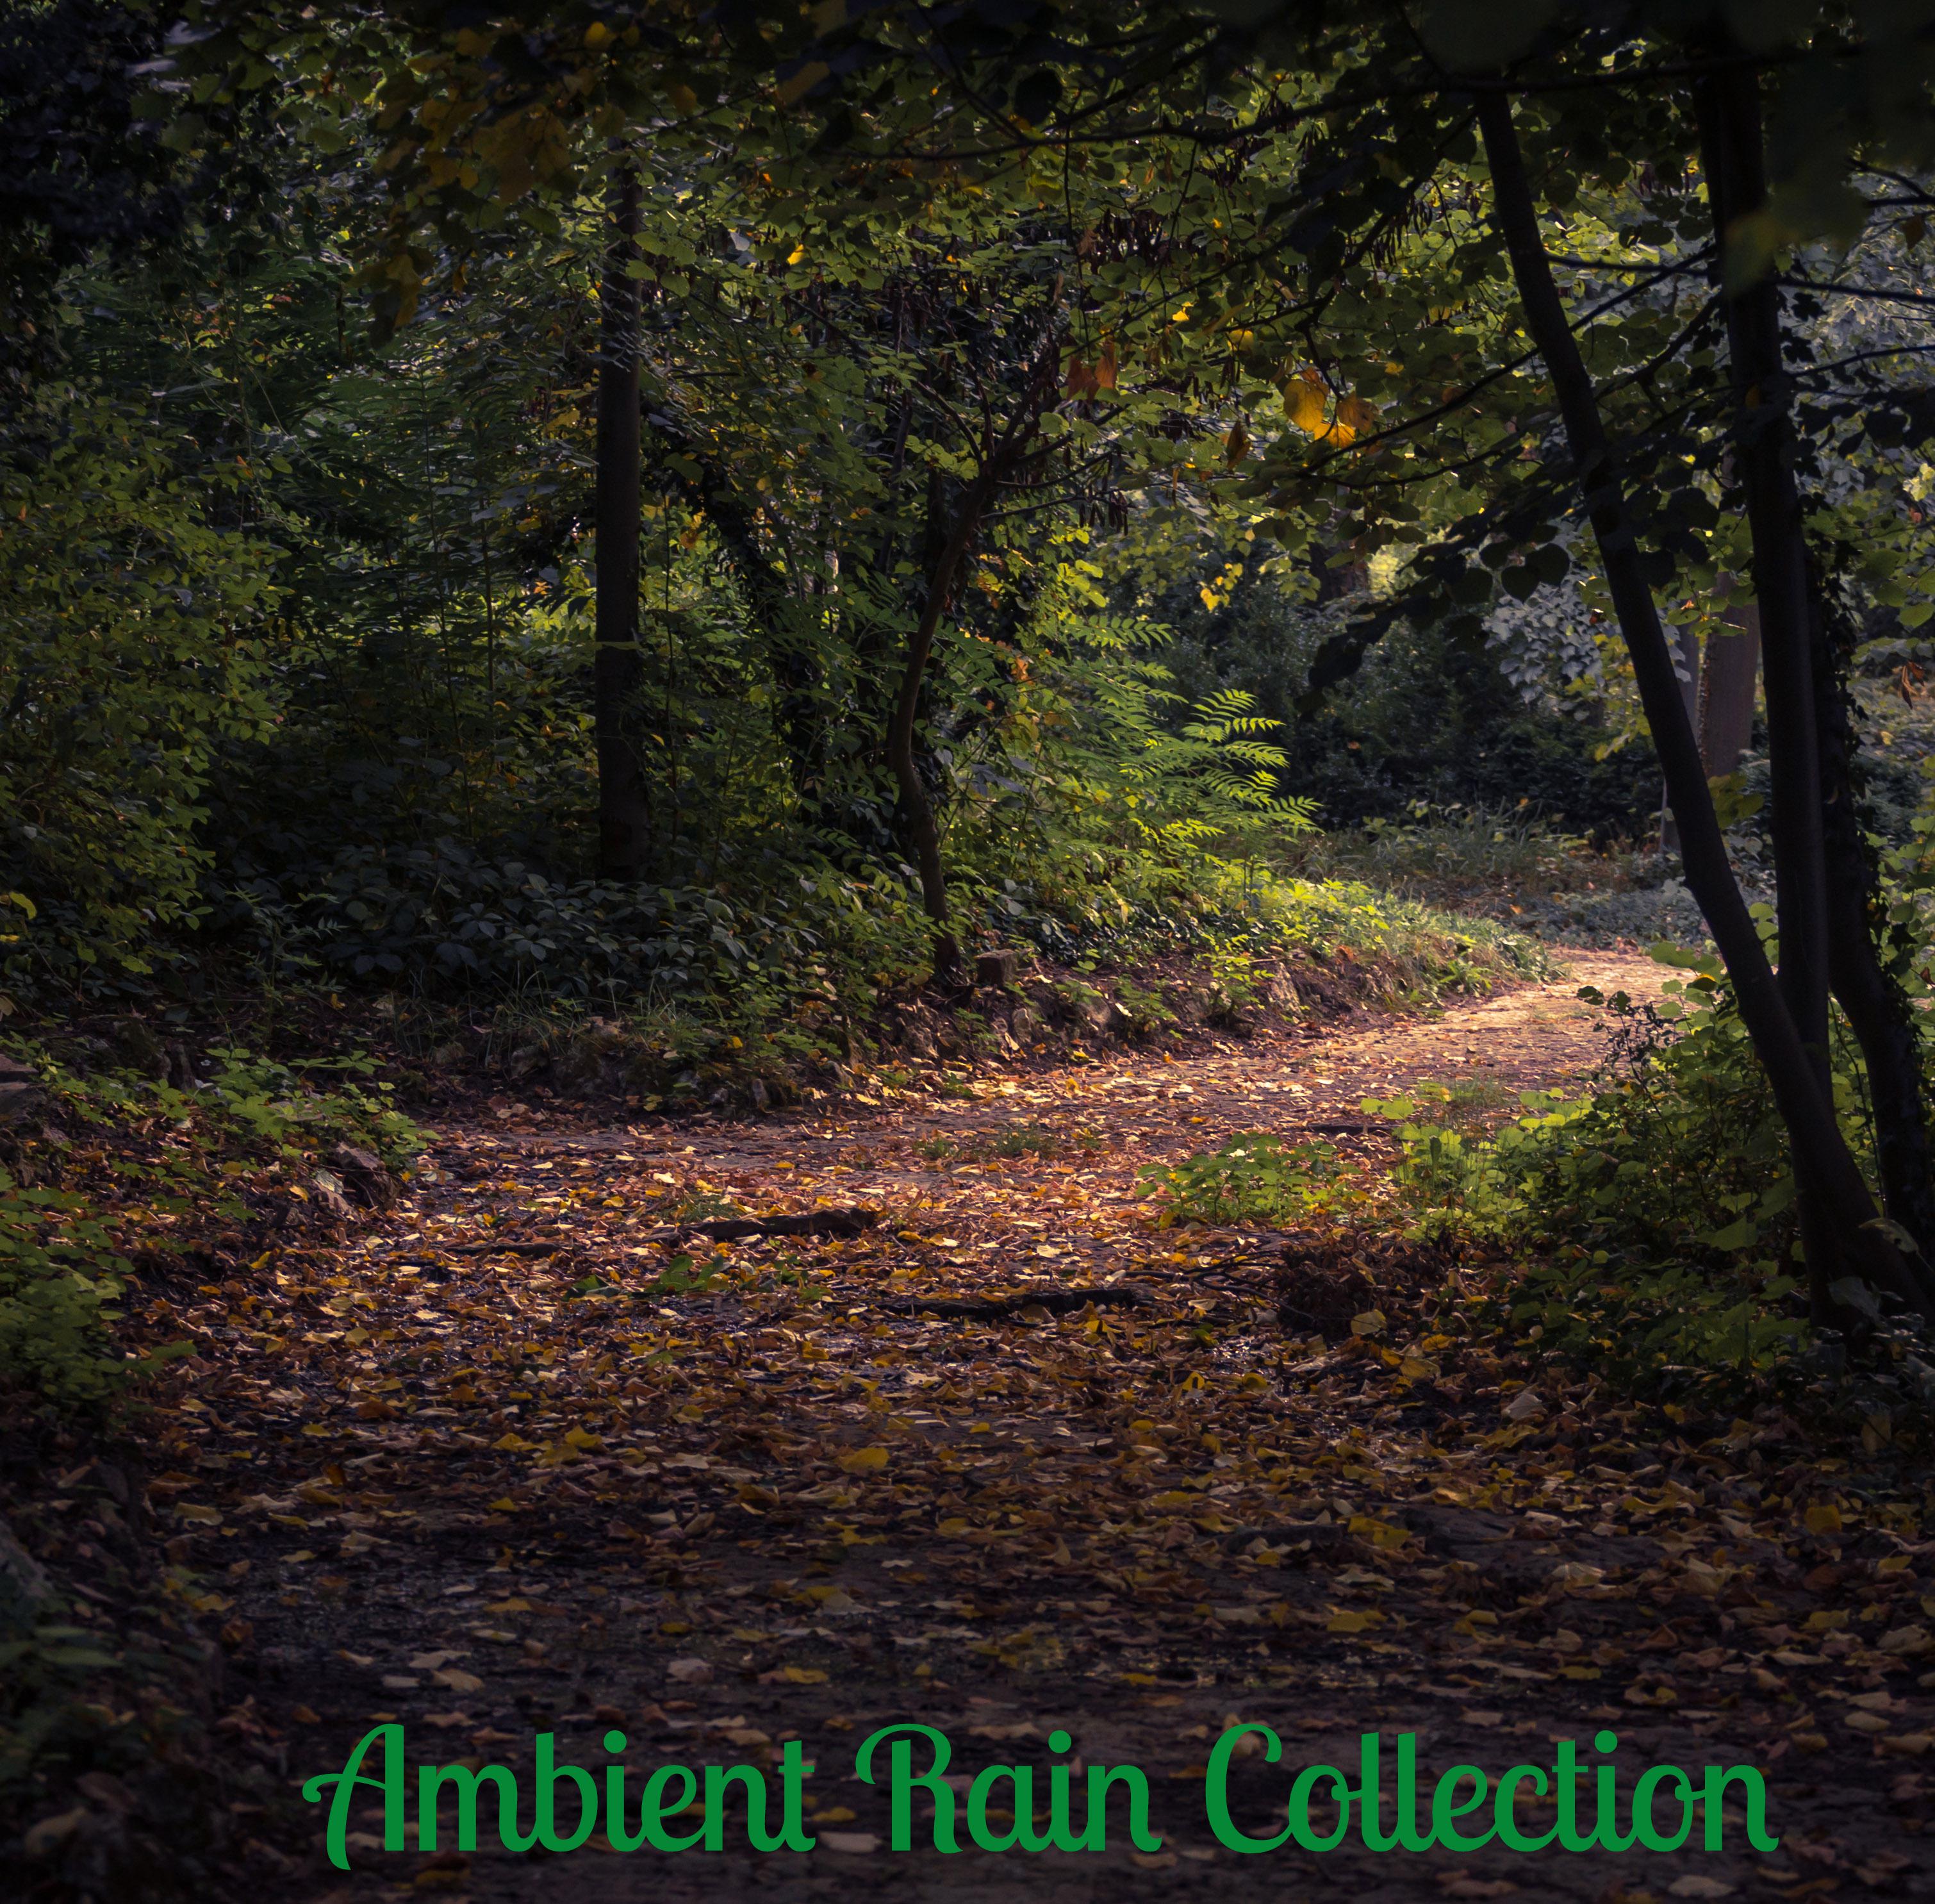 2017 Ambient Rain Collection. Sleep and Meditate Naturally